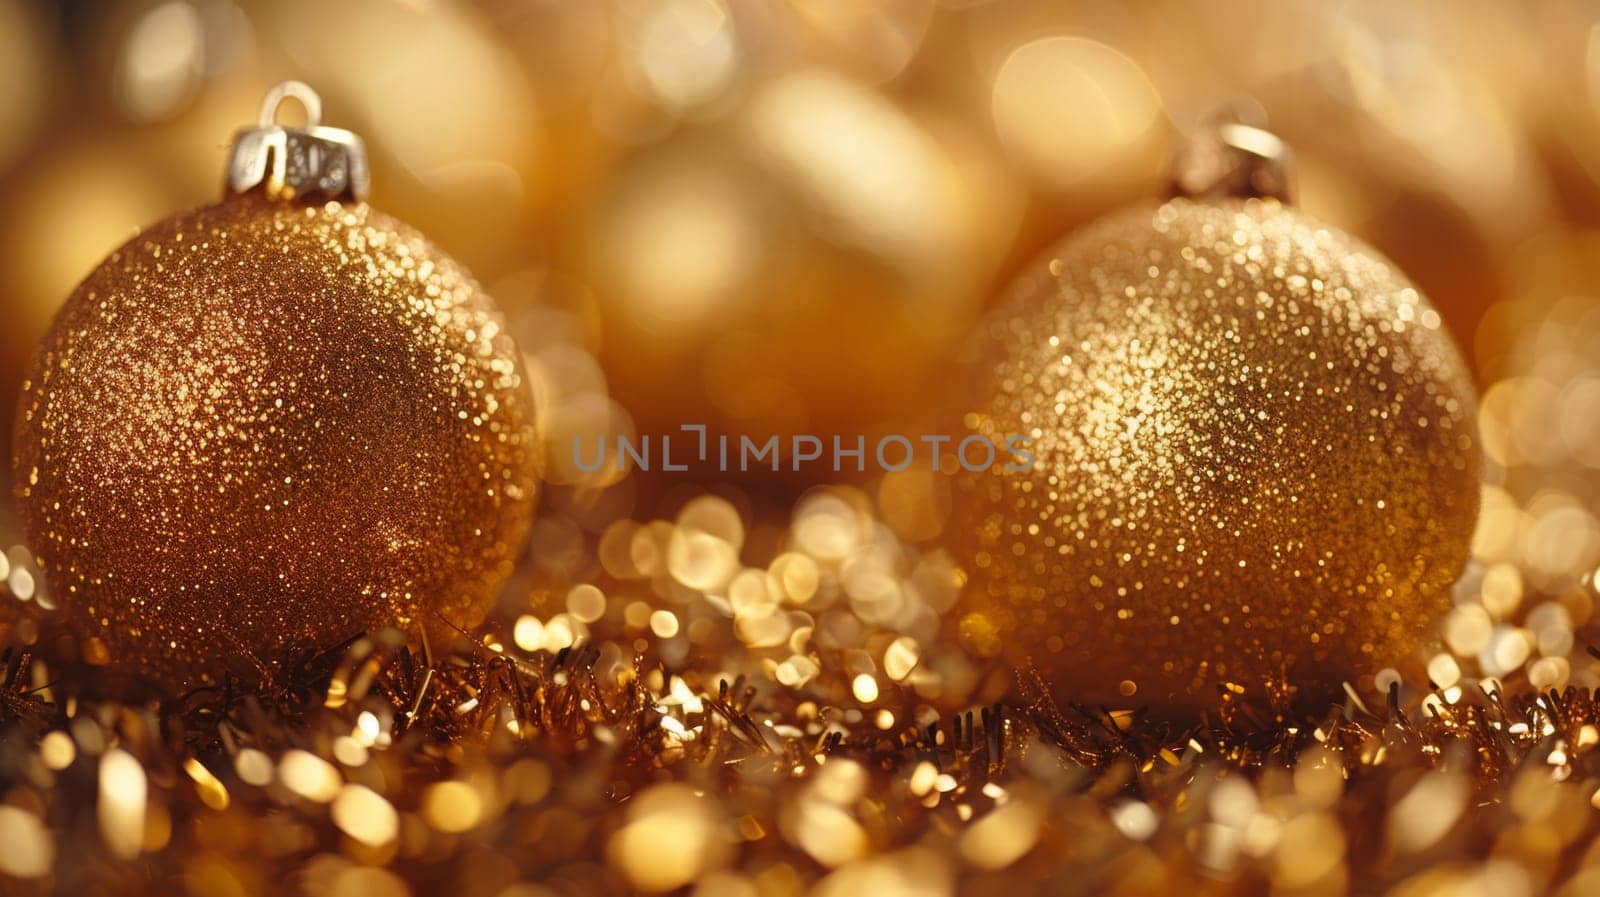 Two shiny gold christmas ornaments on a glittery surface, AI by starush